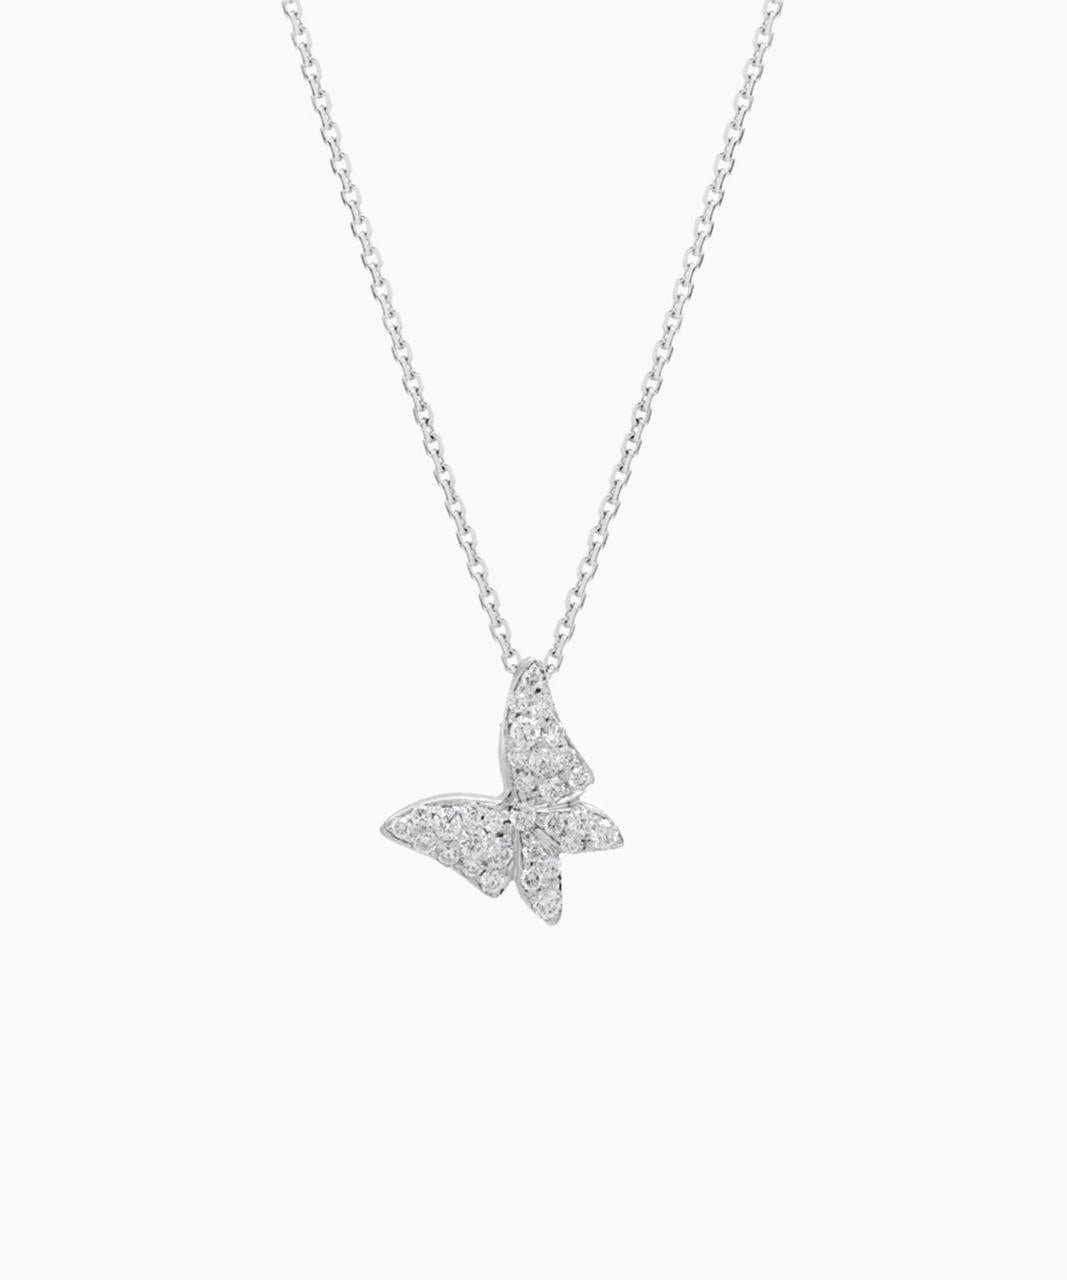 White Butterfly Diamond Necklace - Medio